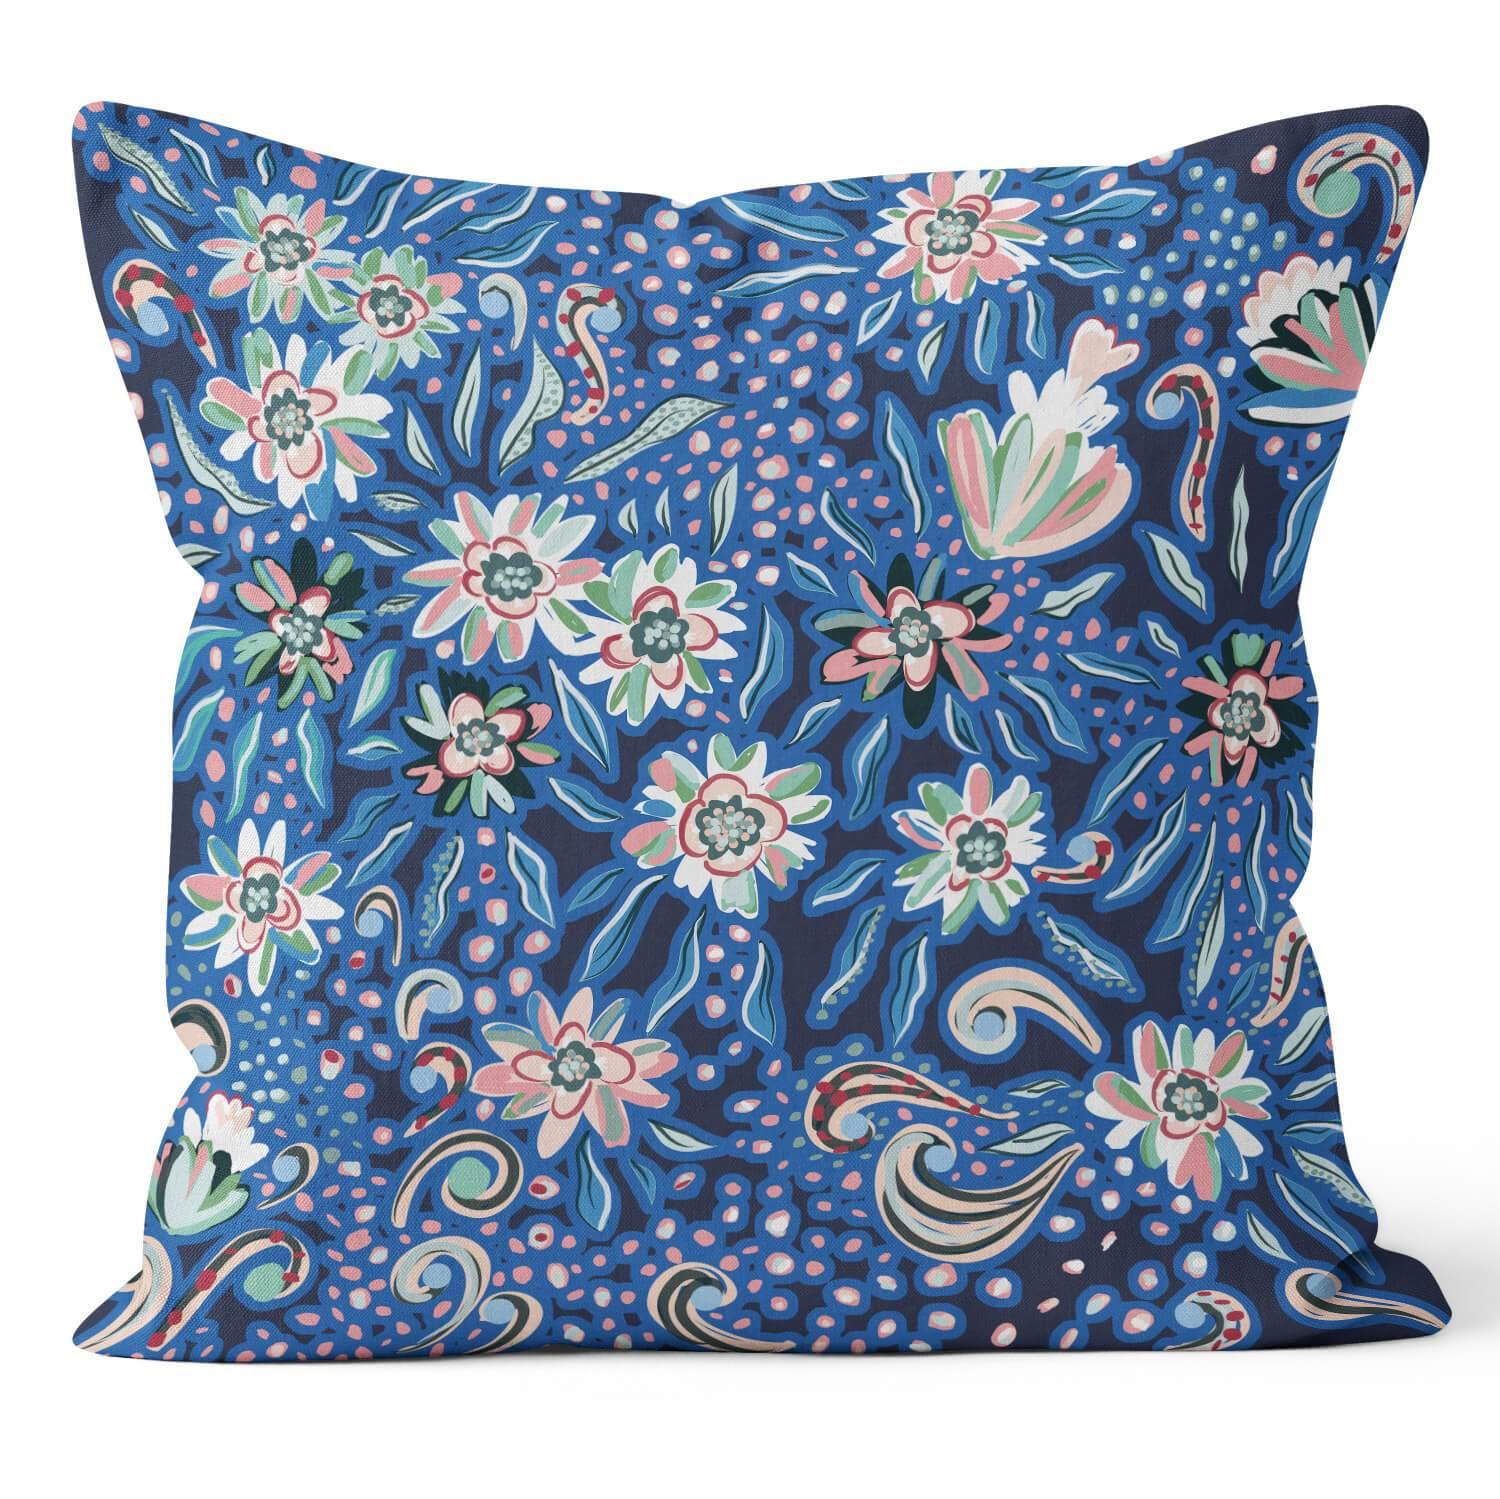 Indian Dreams ( Blue) - Funky Art Cushion - Bellissima - House Of Turnowsky Pillows - Handmade Cushions UK - WeLoveCushions